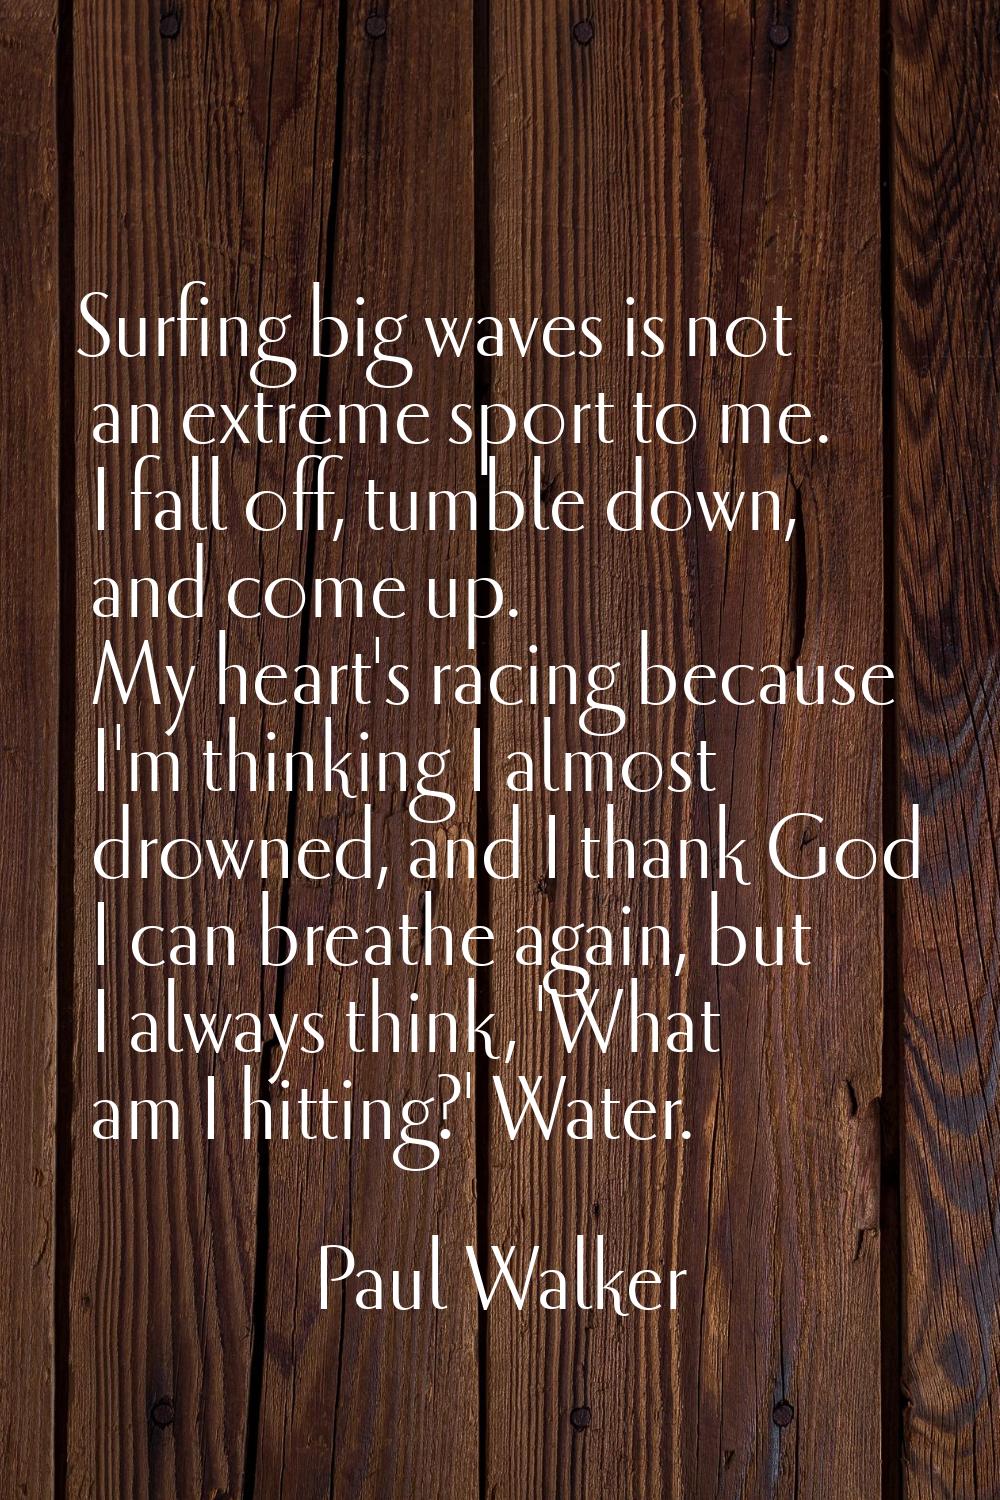 Surfing big waves is not an extreme sport to me. I fall off, tumble down, and come up. My heart's r